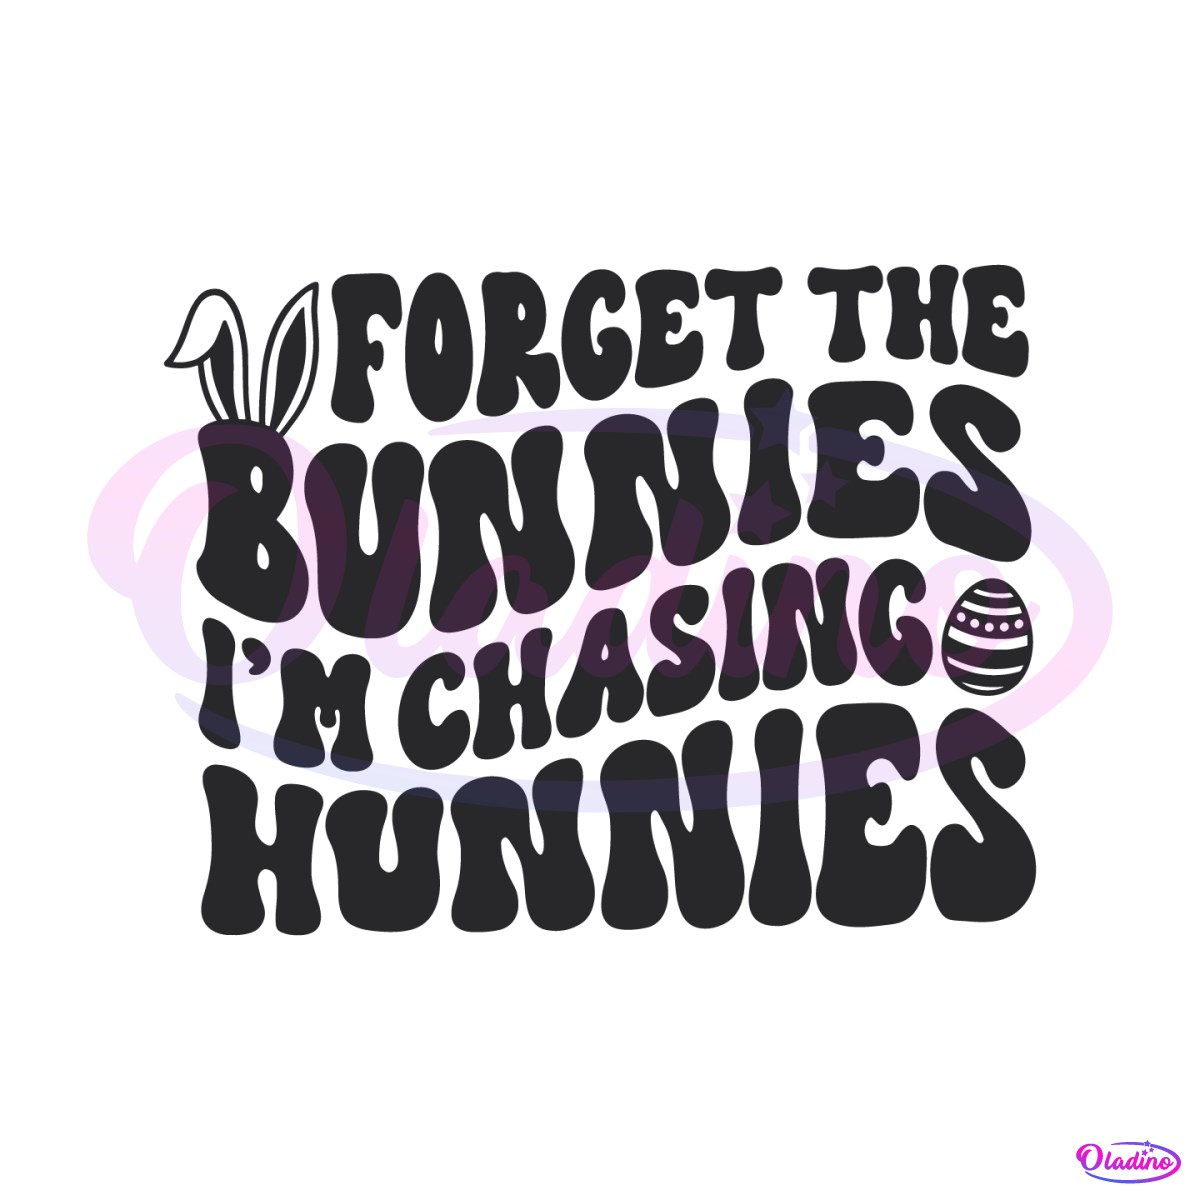 forget-the-bunnies-im-chasing-hunnies-svg